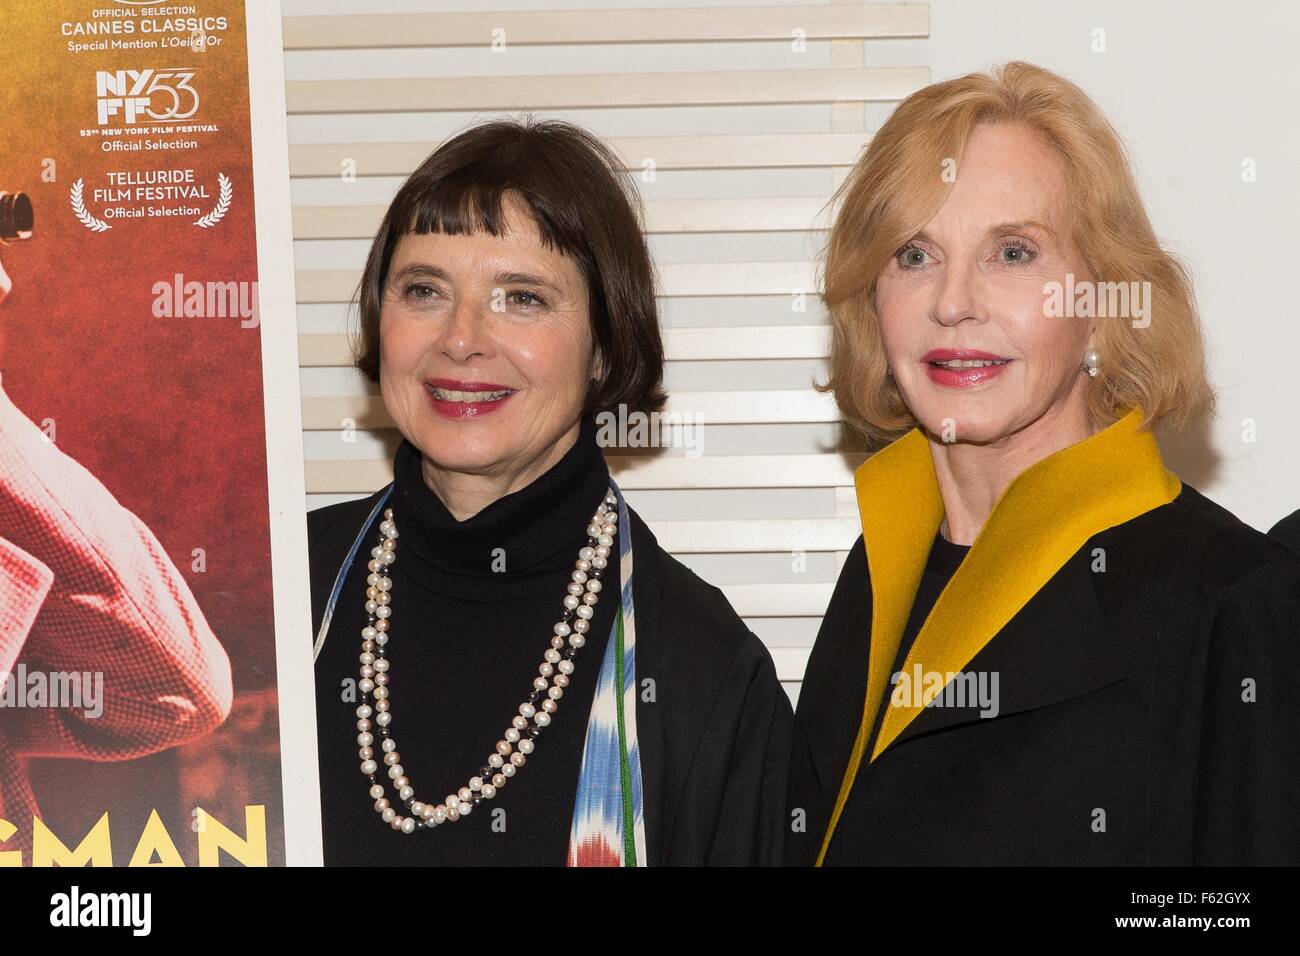 New York, NY, USA. 10th Nov, 2015. Isabella Rossellini, Pia Lindstrom at arrivals for INGRID BERGMAN: IN HER OWN WORDS Screening Presented by Rialto Pictures and Scandinavia House, Scandinavia House, New York, NY November 10, 2015. Credit:  Jason Smith/Everett Collection/Alamy Live News Stock Photo